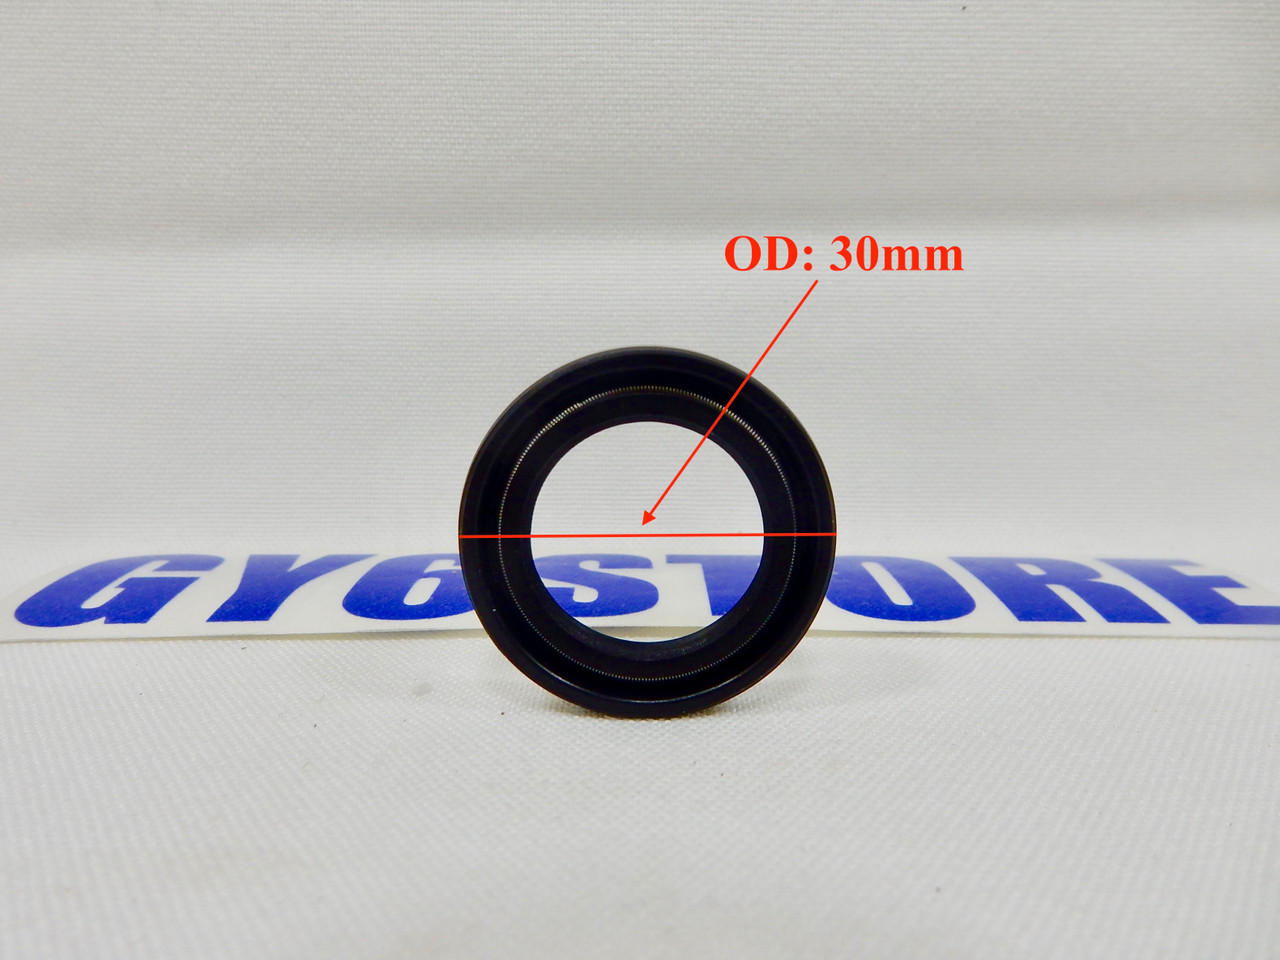 19.8 X 30 X 5 OIL SEAL FOR 50cc QMB139 & 150cc GY6 MOTORS *BUYER GETS 2*